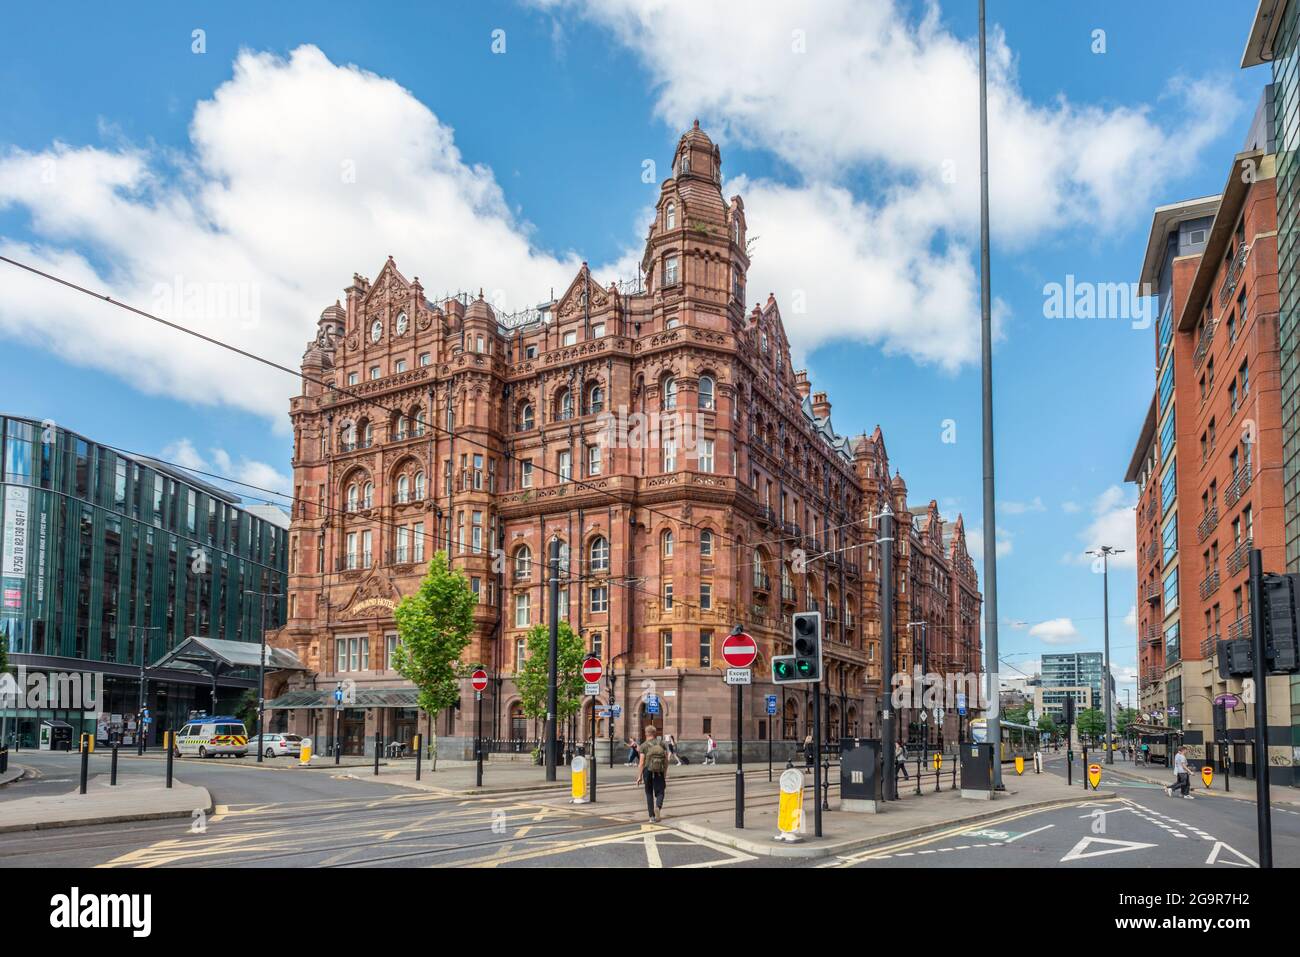 Manchester, July 14th2021: The Midland Hotel in Manchester city centre Stock Photo